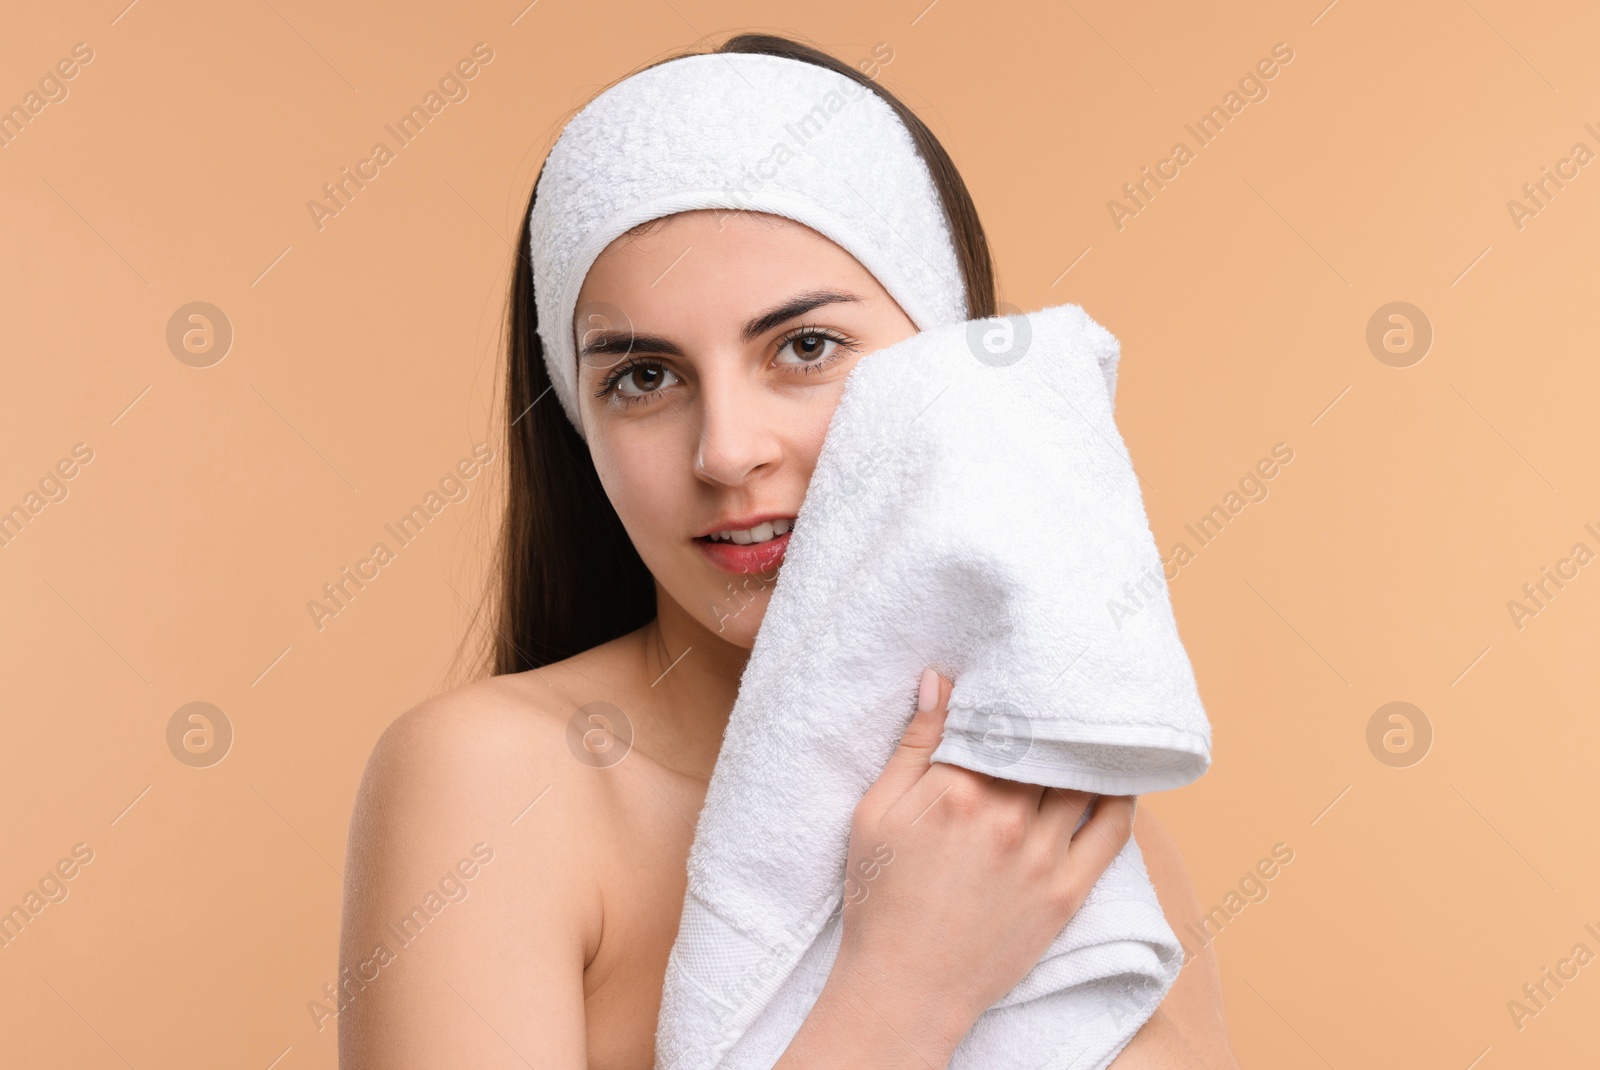 Photo of Washing face. Young woman with headband and towel on beige background